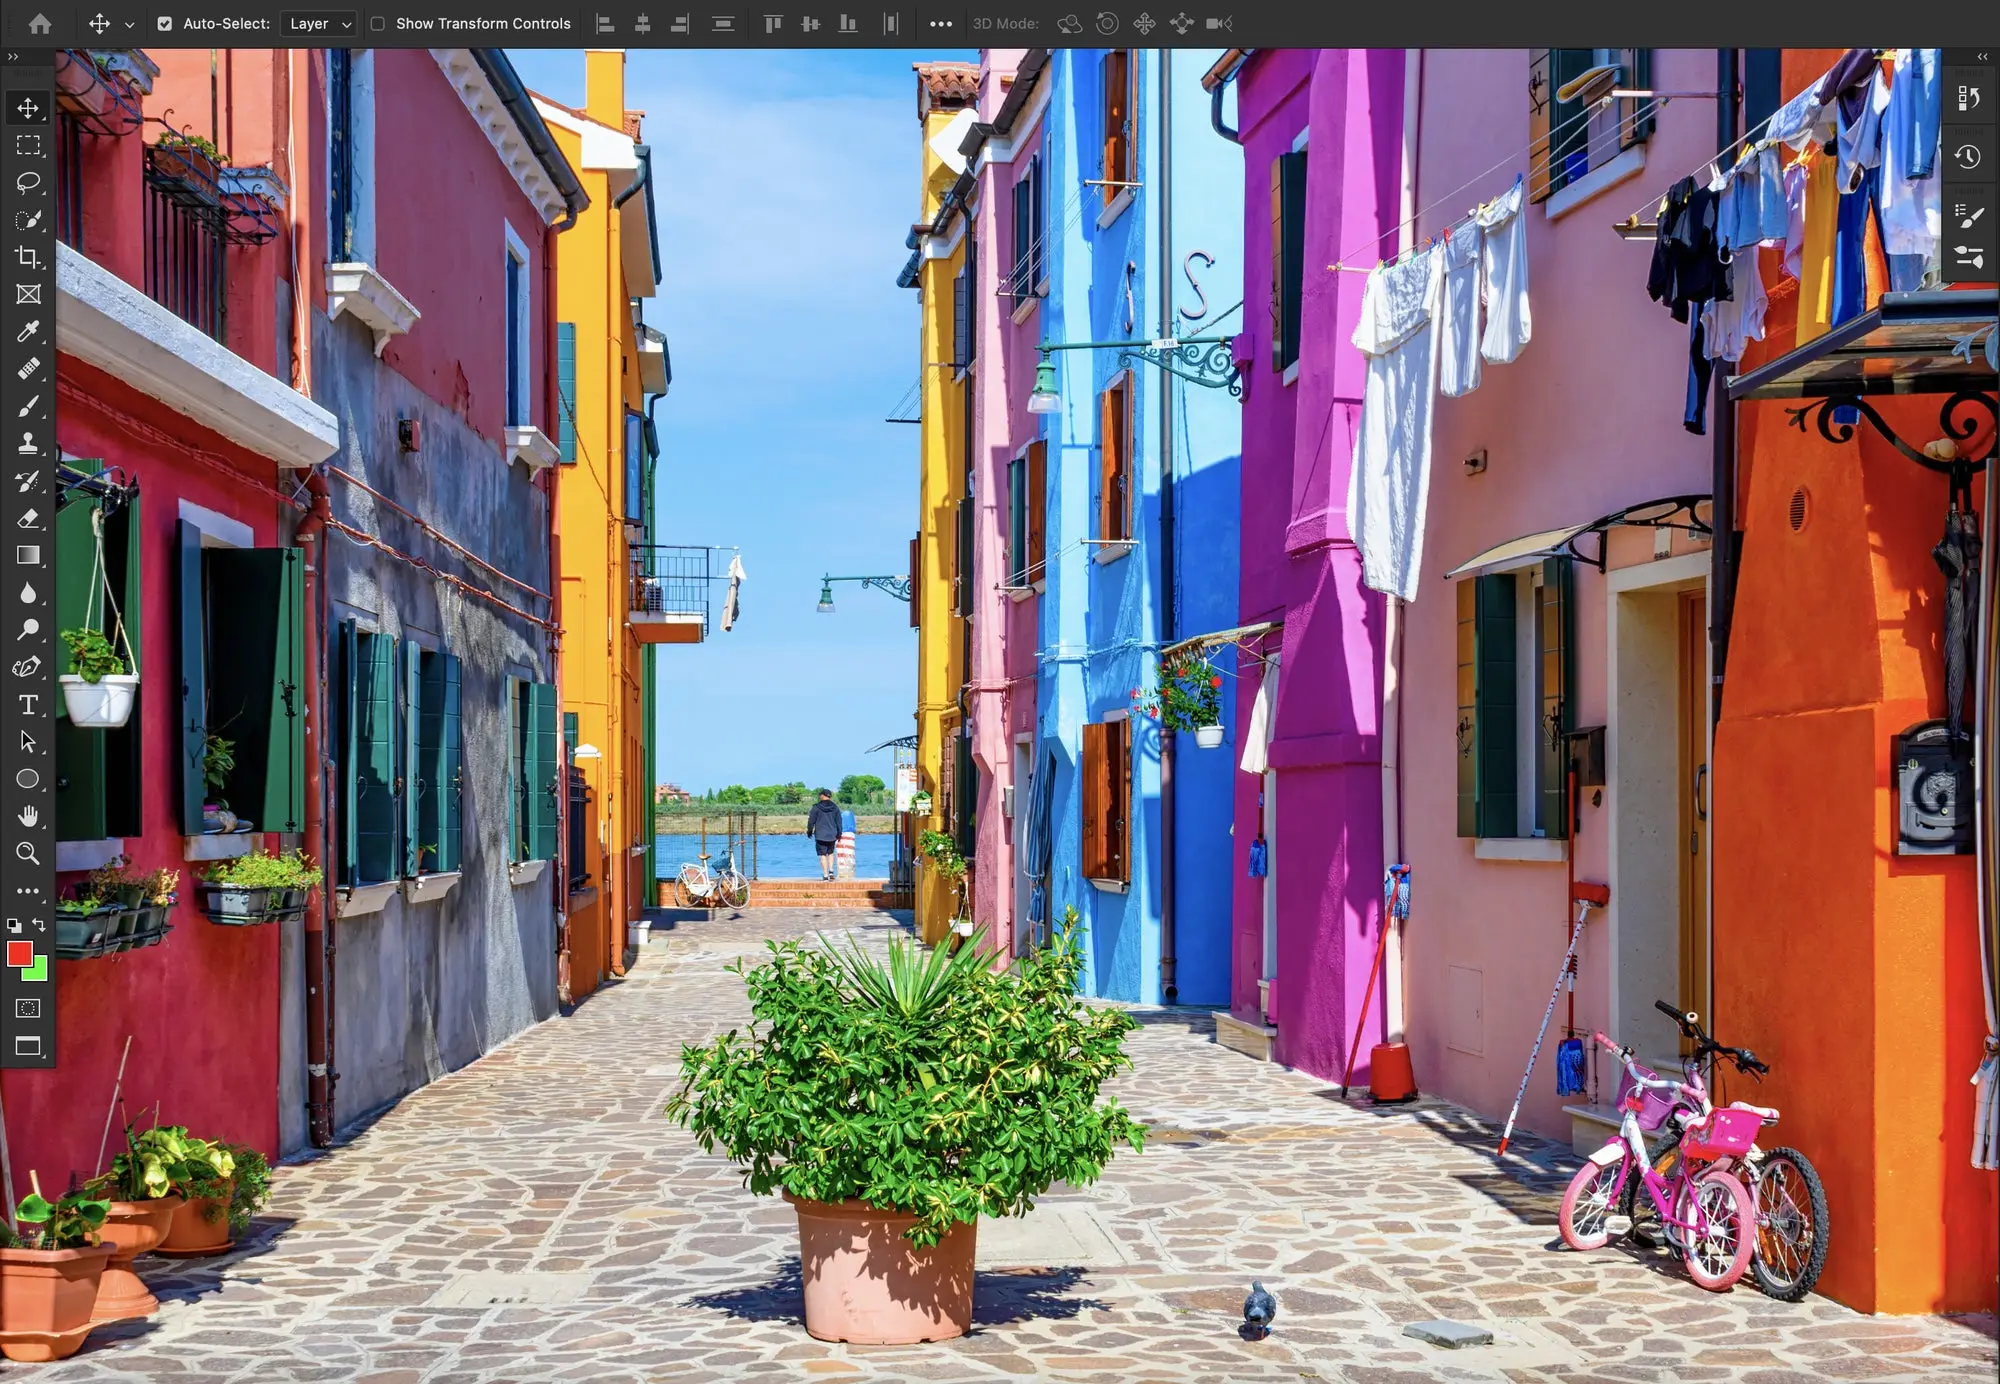 Screenshot of Photoshop's improved color managment and HDR capabilities. 